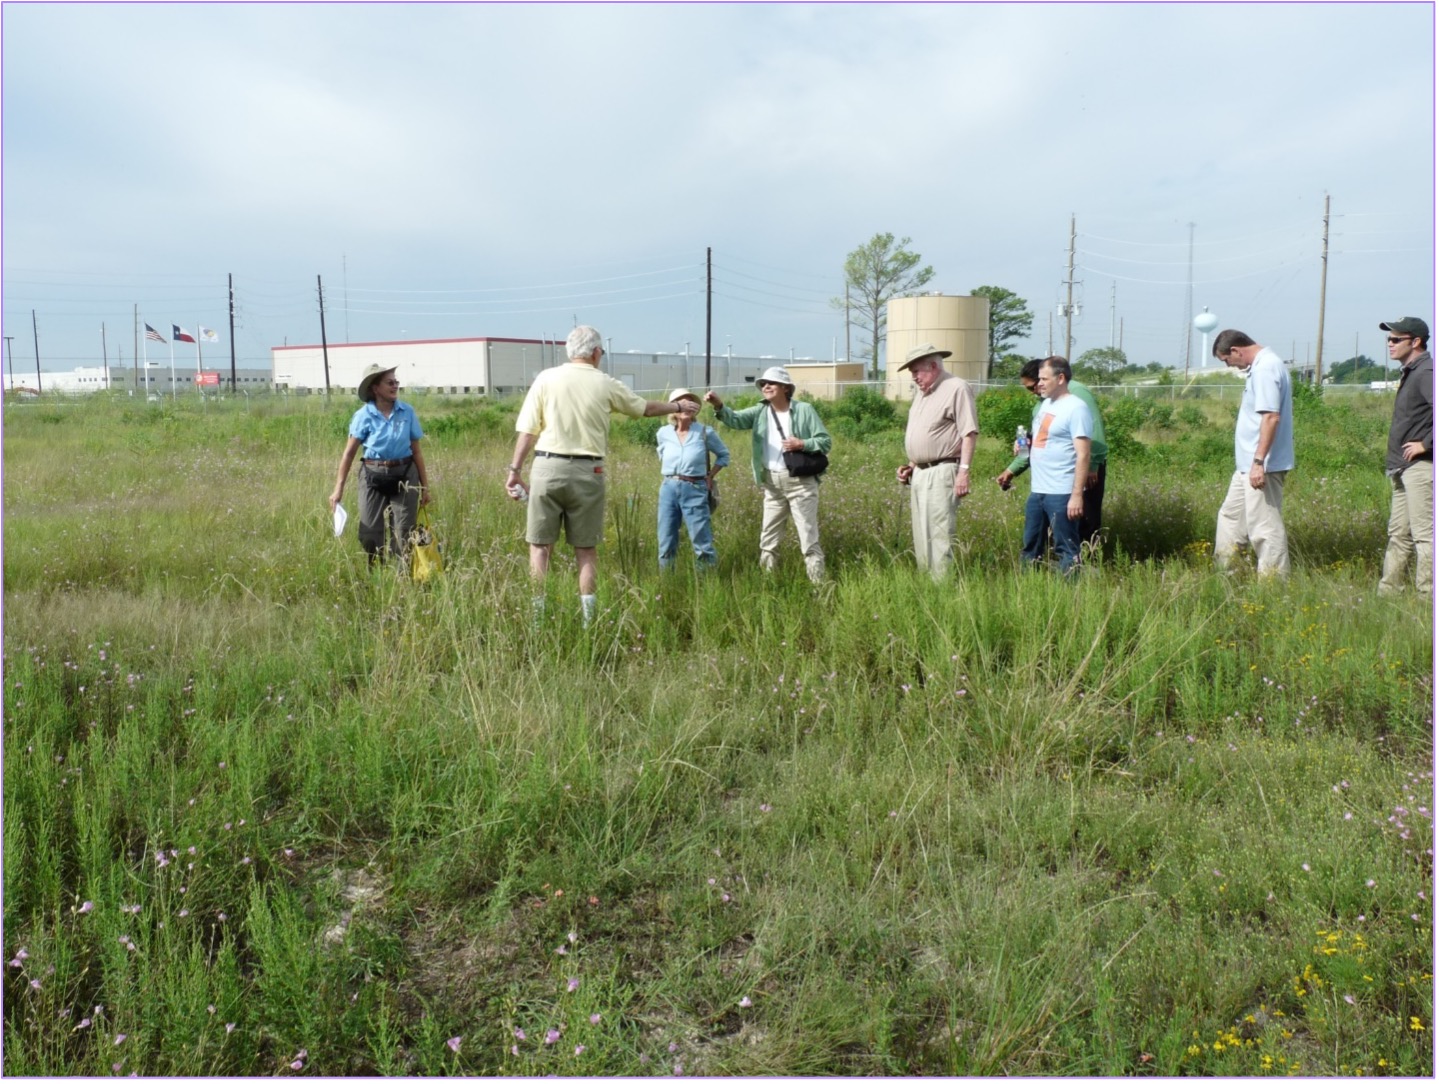 A group of people standing in prairie grasses.